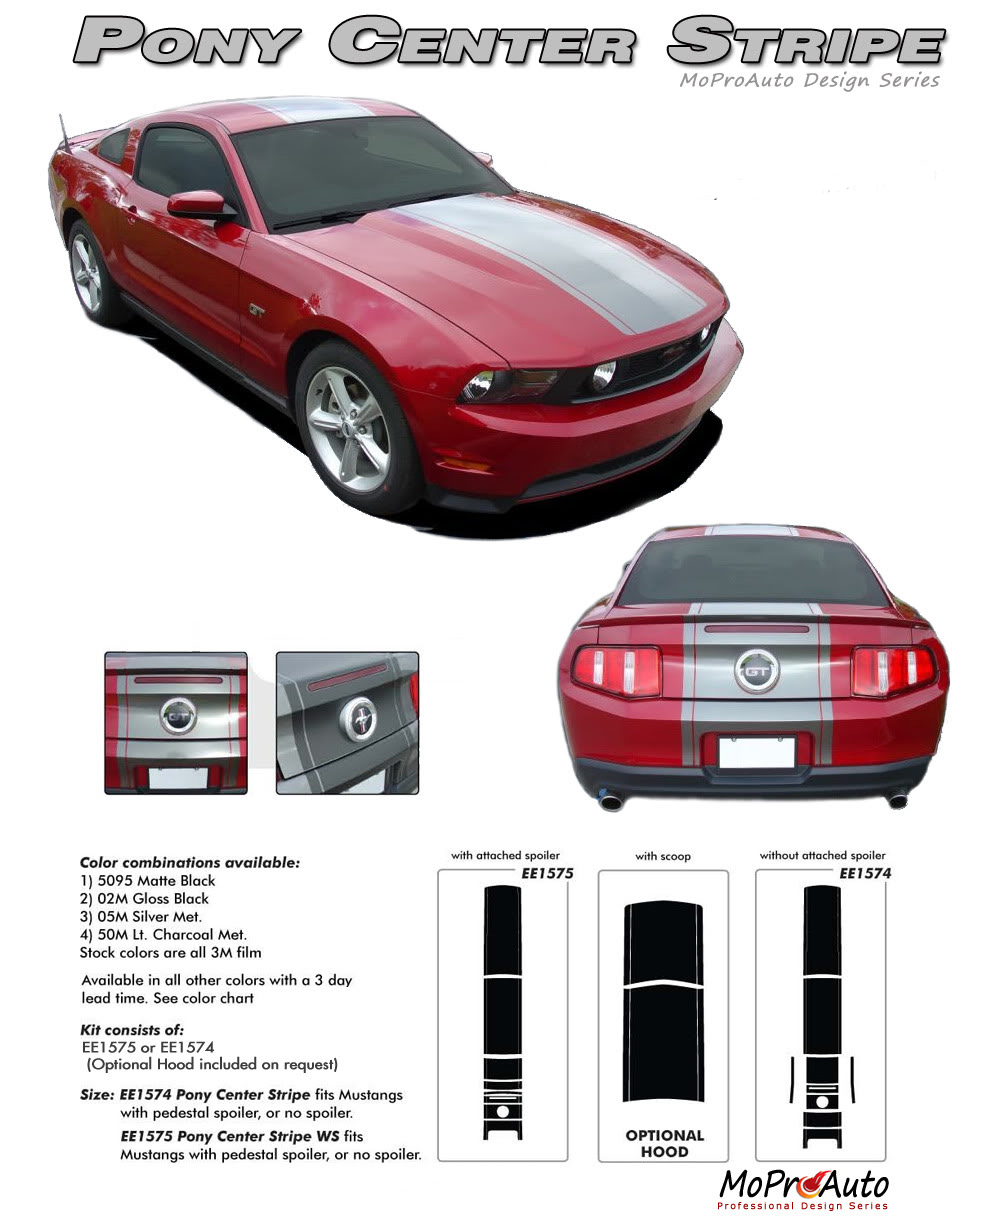 PONY CENTER OEM SUPER SNAKE STYLE Ford Mustang - MoProAuto Pro Design Series Vinyl Graphics, Stripes and Decals Kit